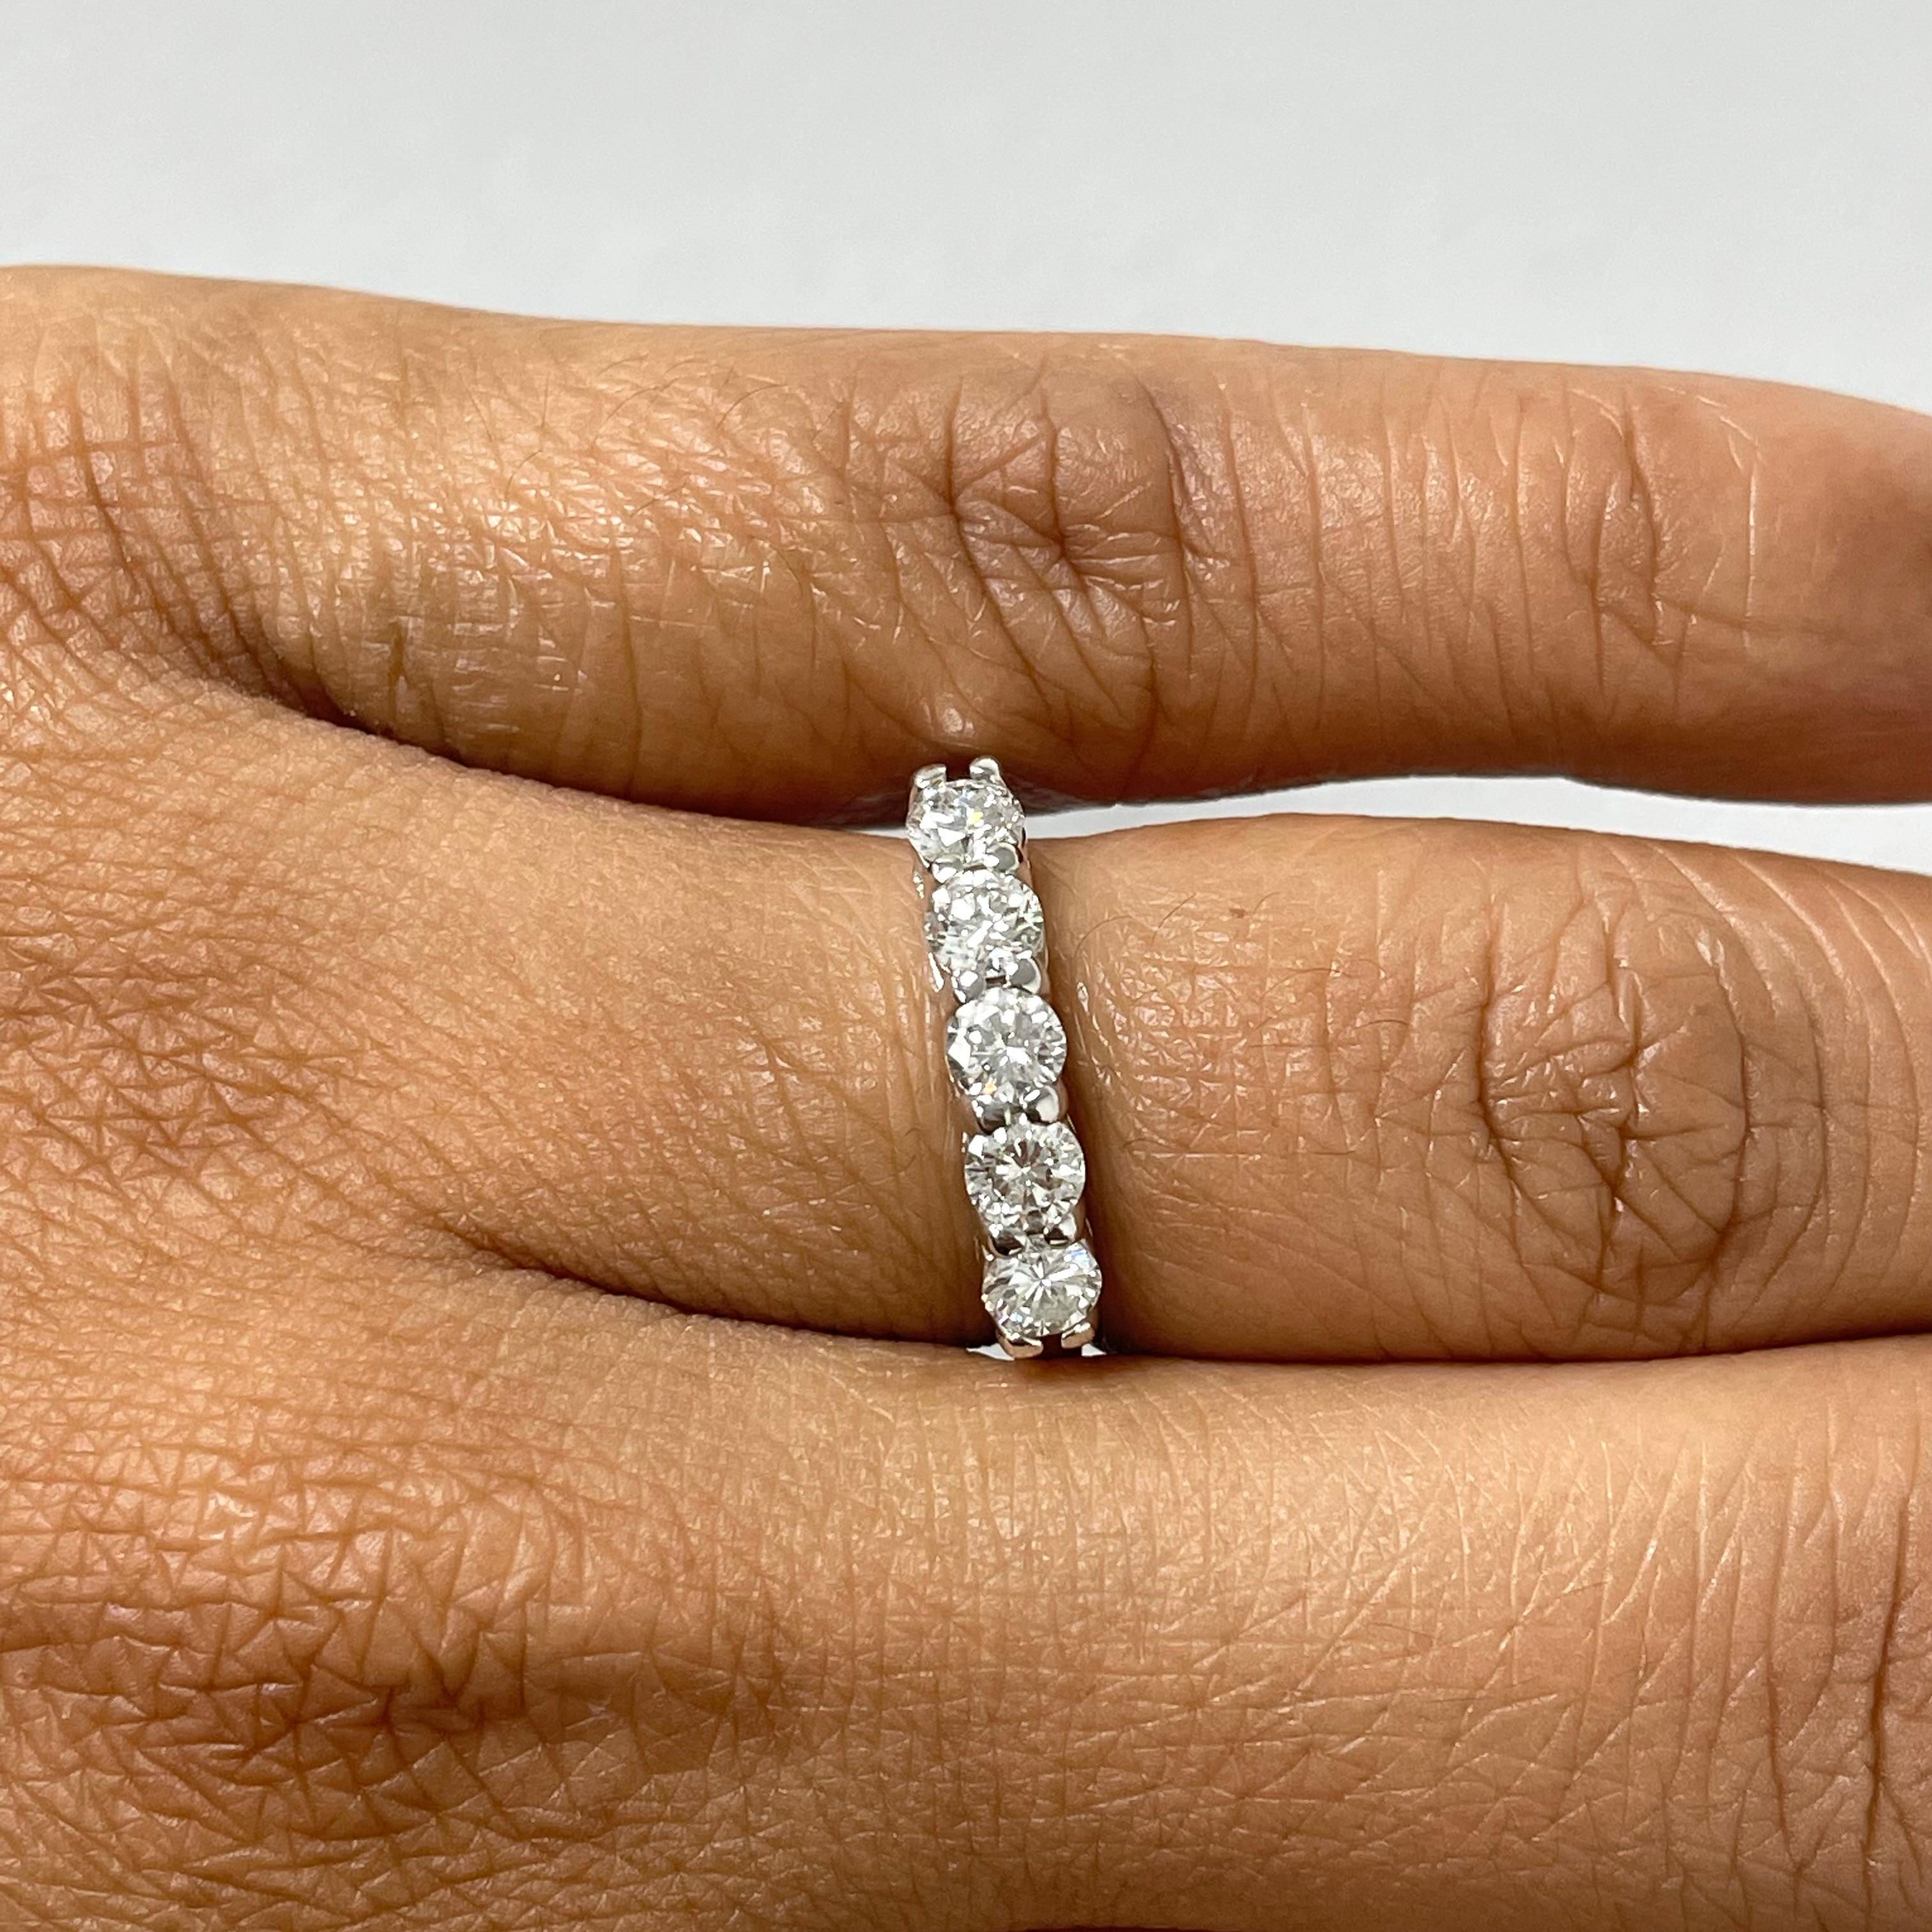 The 5 Diamond Band is a simple and classic style that compliments and enhances any traditional engagement ring, yet also makes a statement worn independently. 

Diamond Shape: Round 
Total Diamond Weight: 0.85 ct
No. of Diamonds: 5
Diamond Color: H